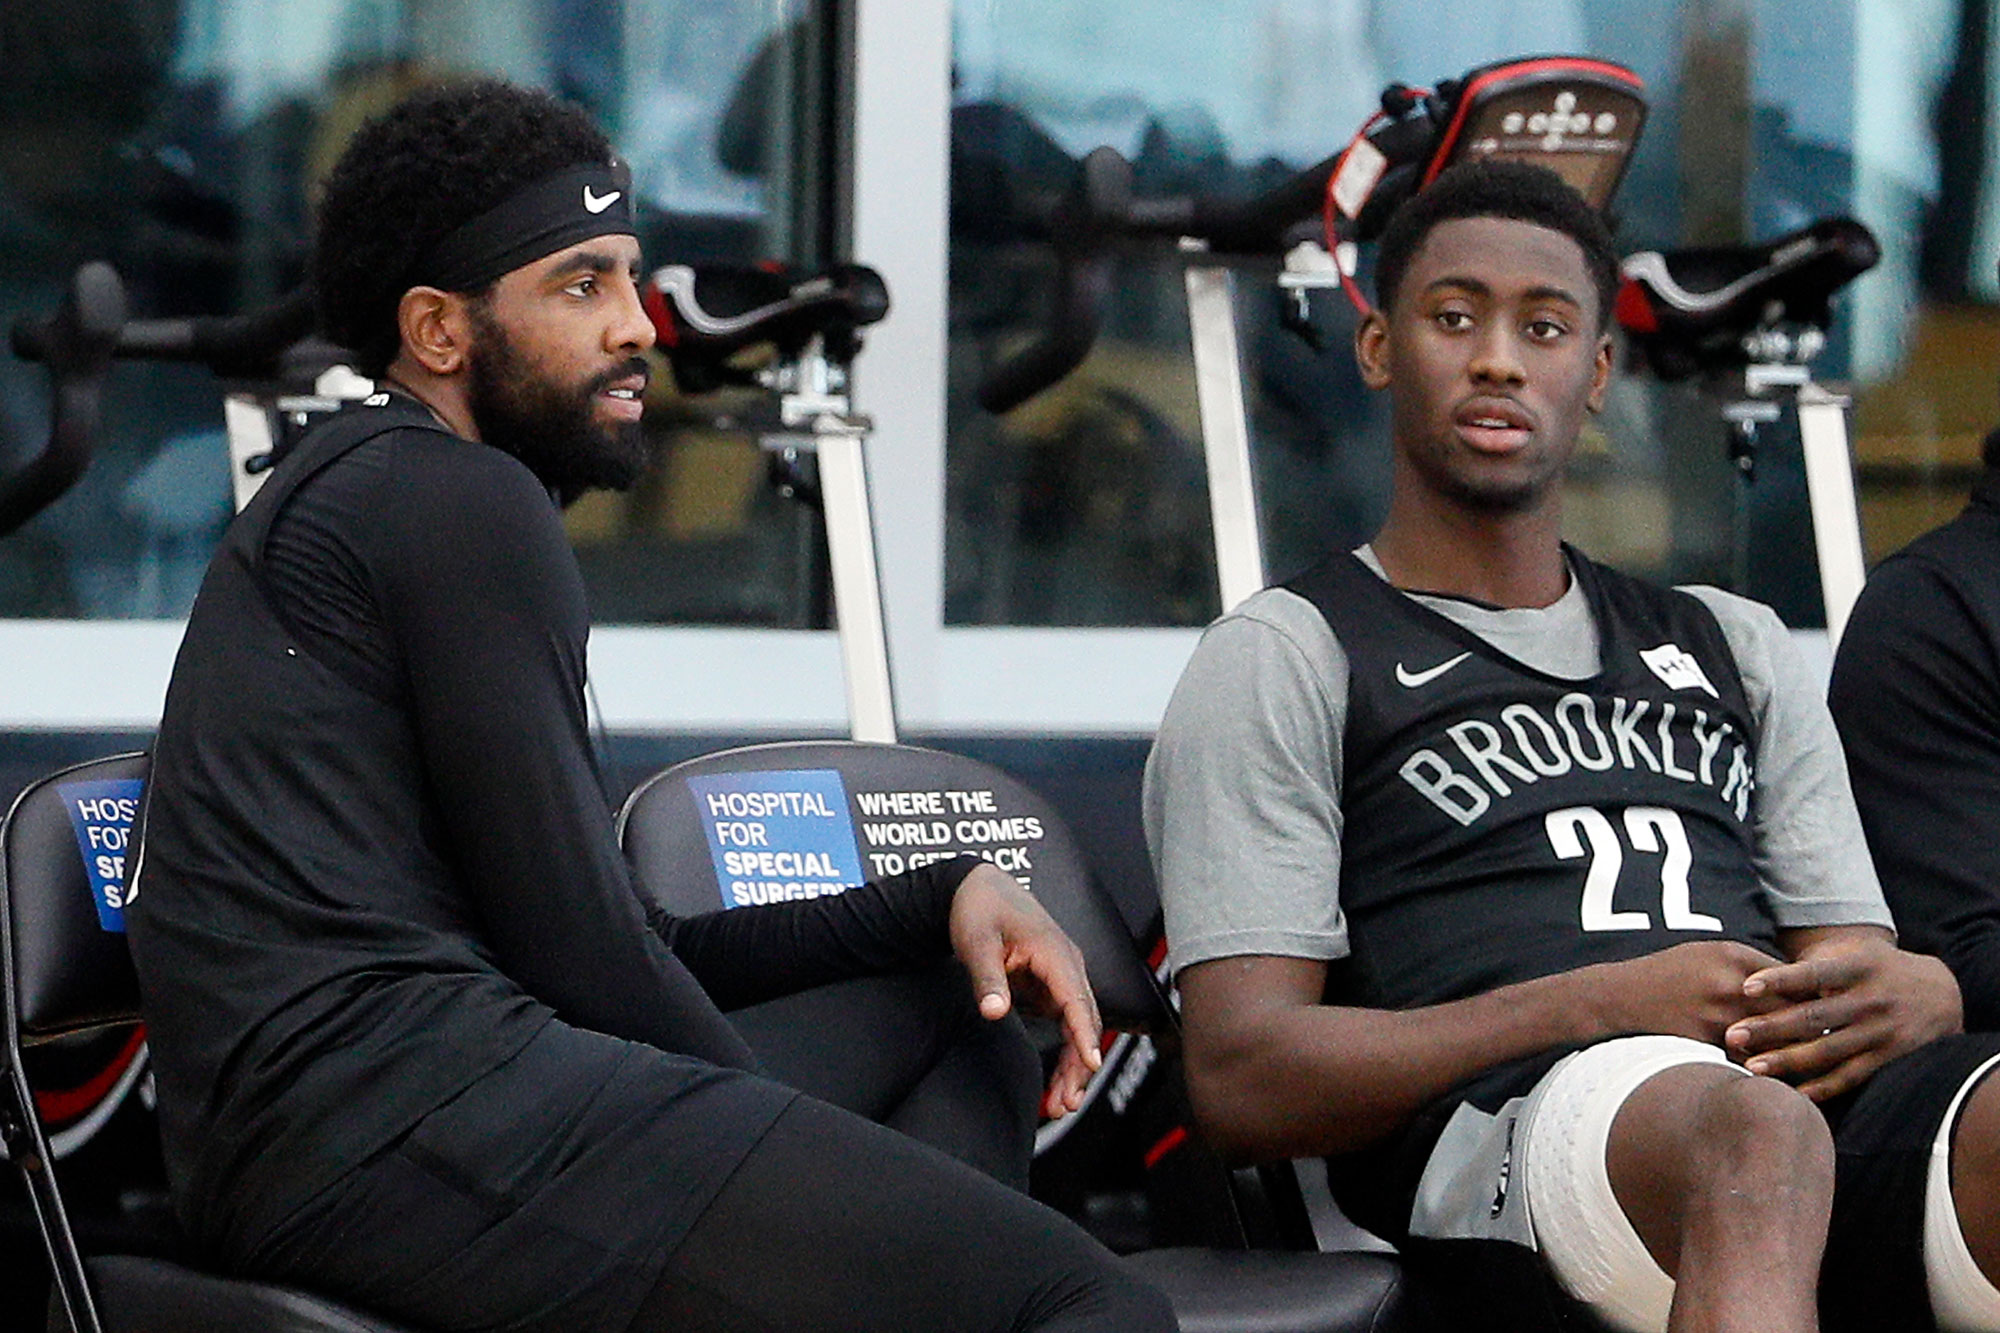 Kyrie Irving #11 of the Brooklyn Nets talks with Caris LeVert #22 of the Brooklyn Nets during practice